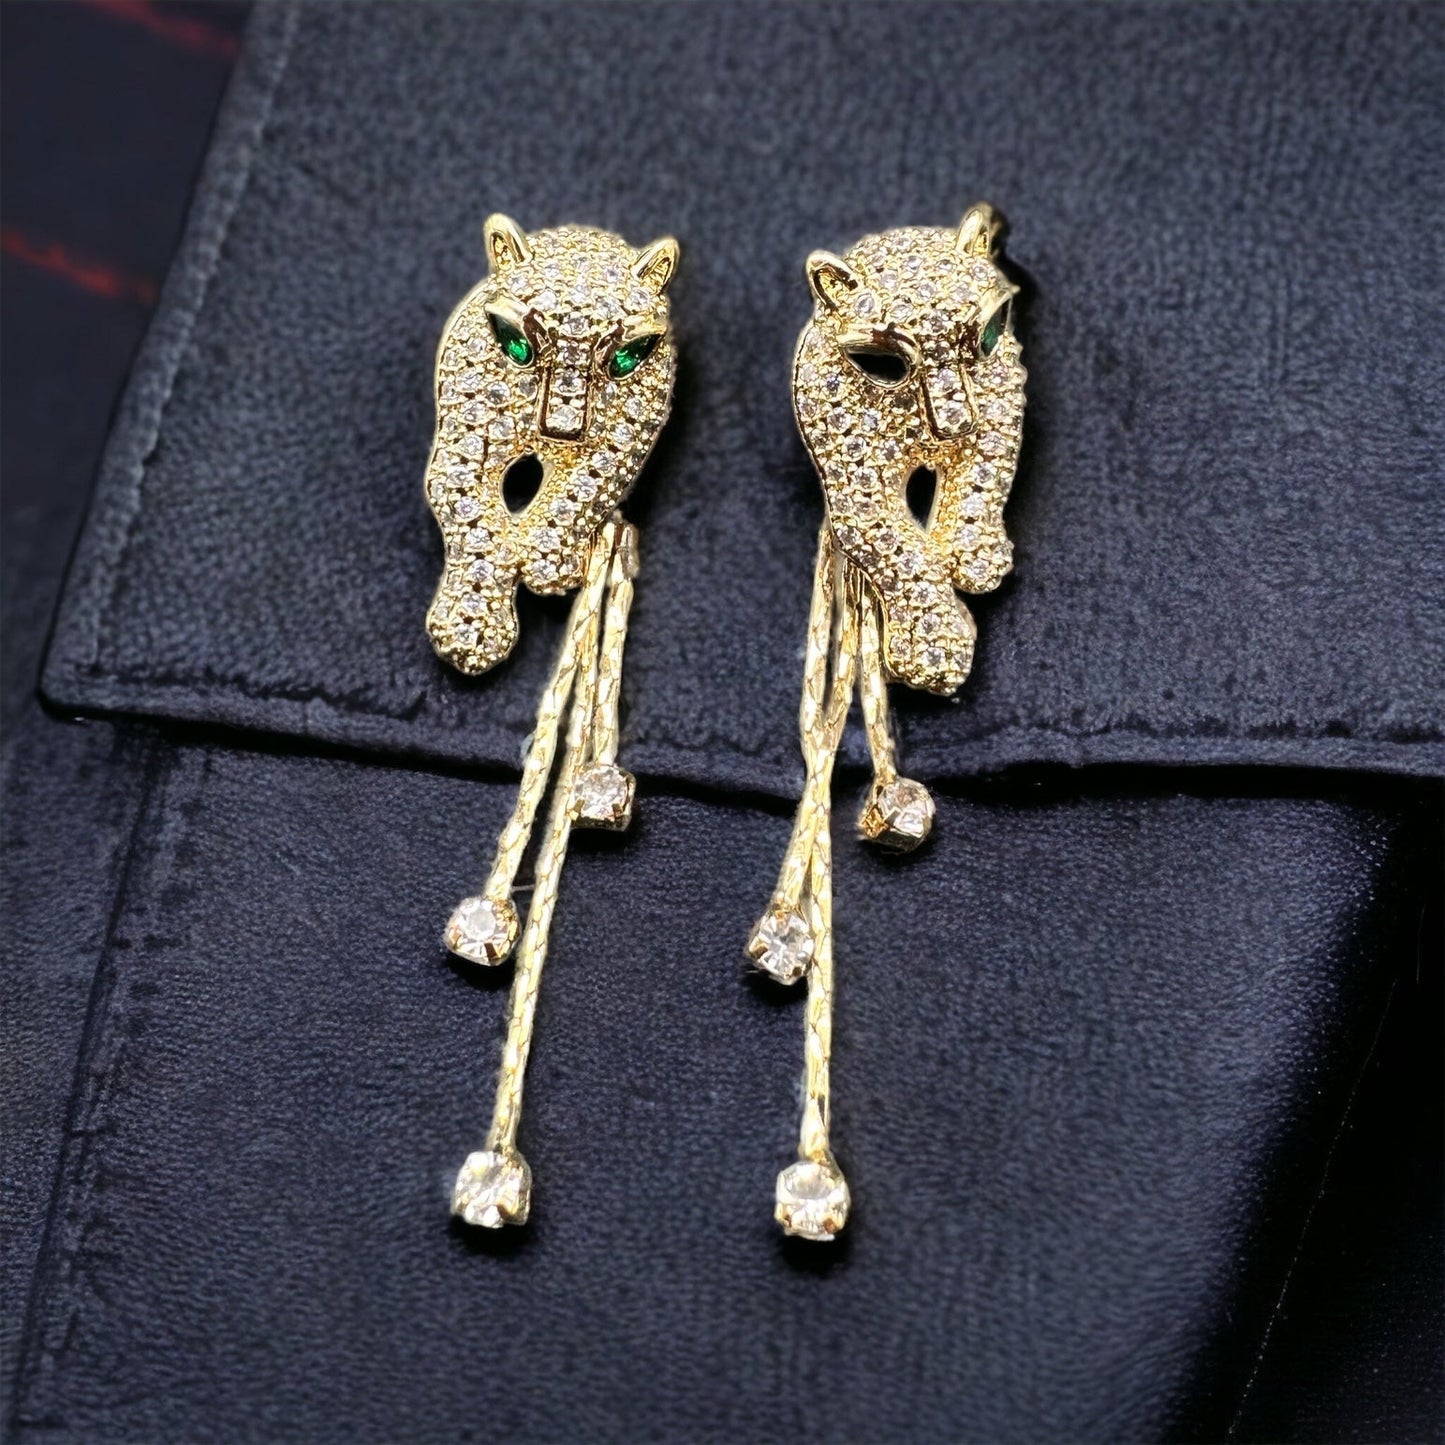 Fauve Earrings | Minh Atelier - Jewelry - 18k Gold - Plated